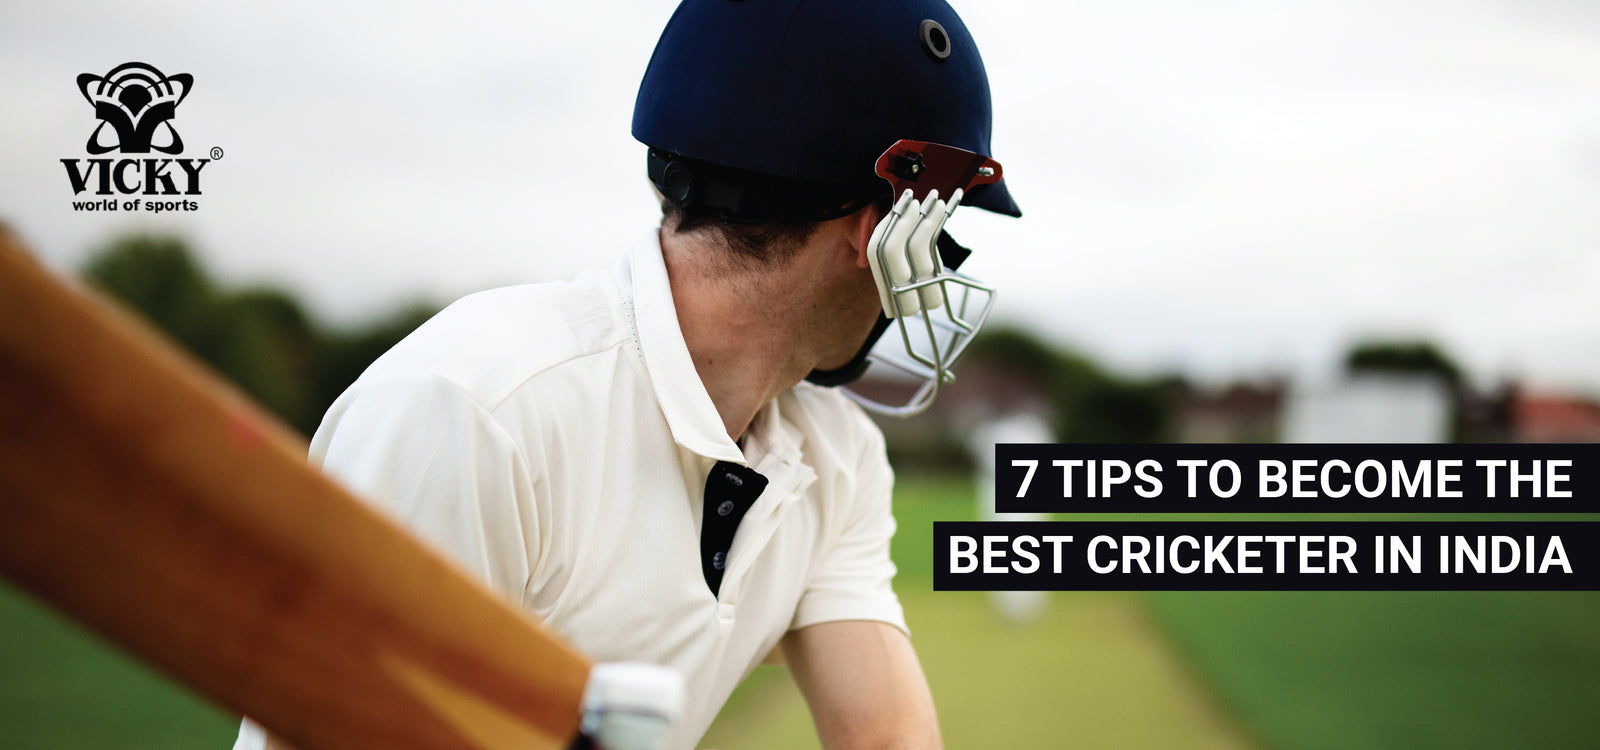 Top 7 Tips to become the best Cricketer in India